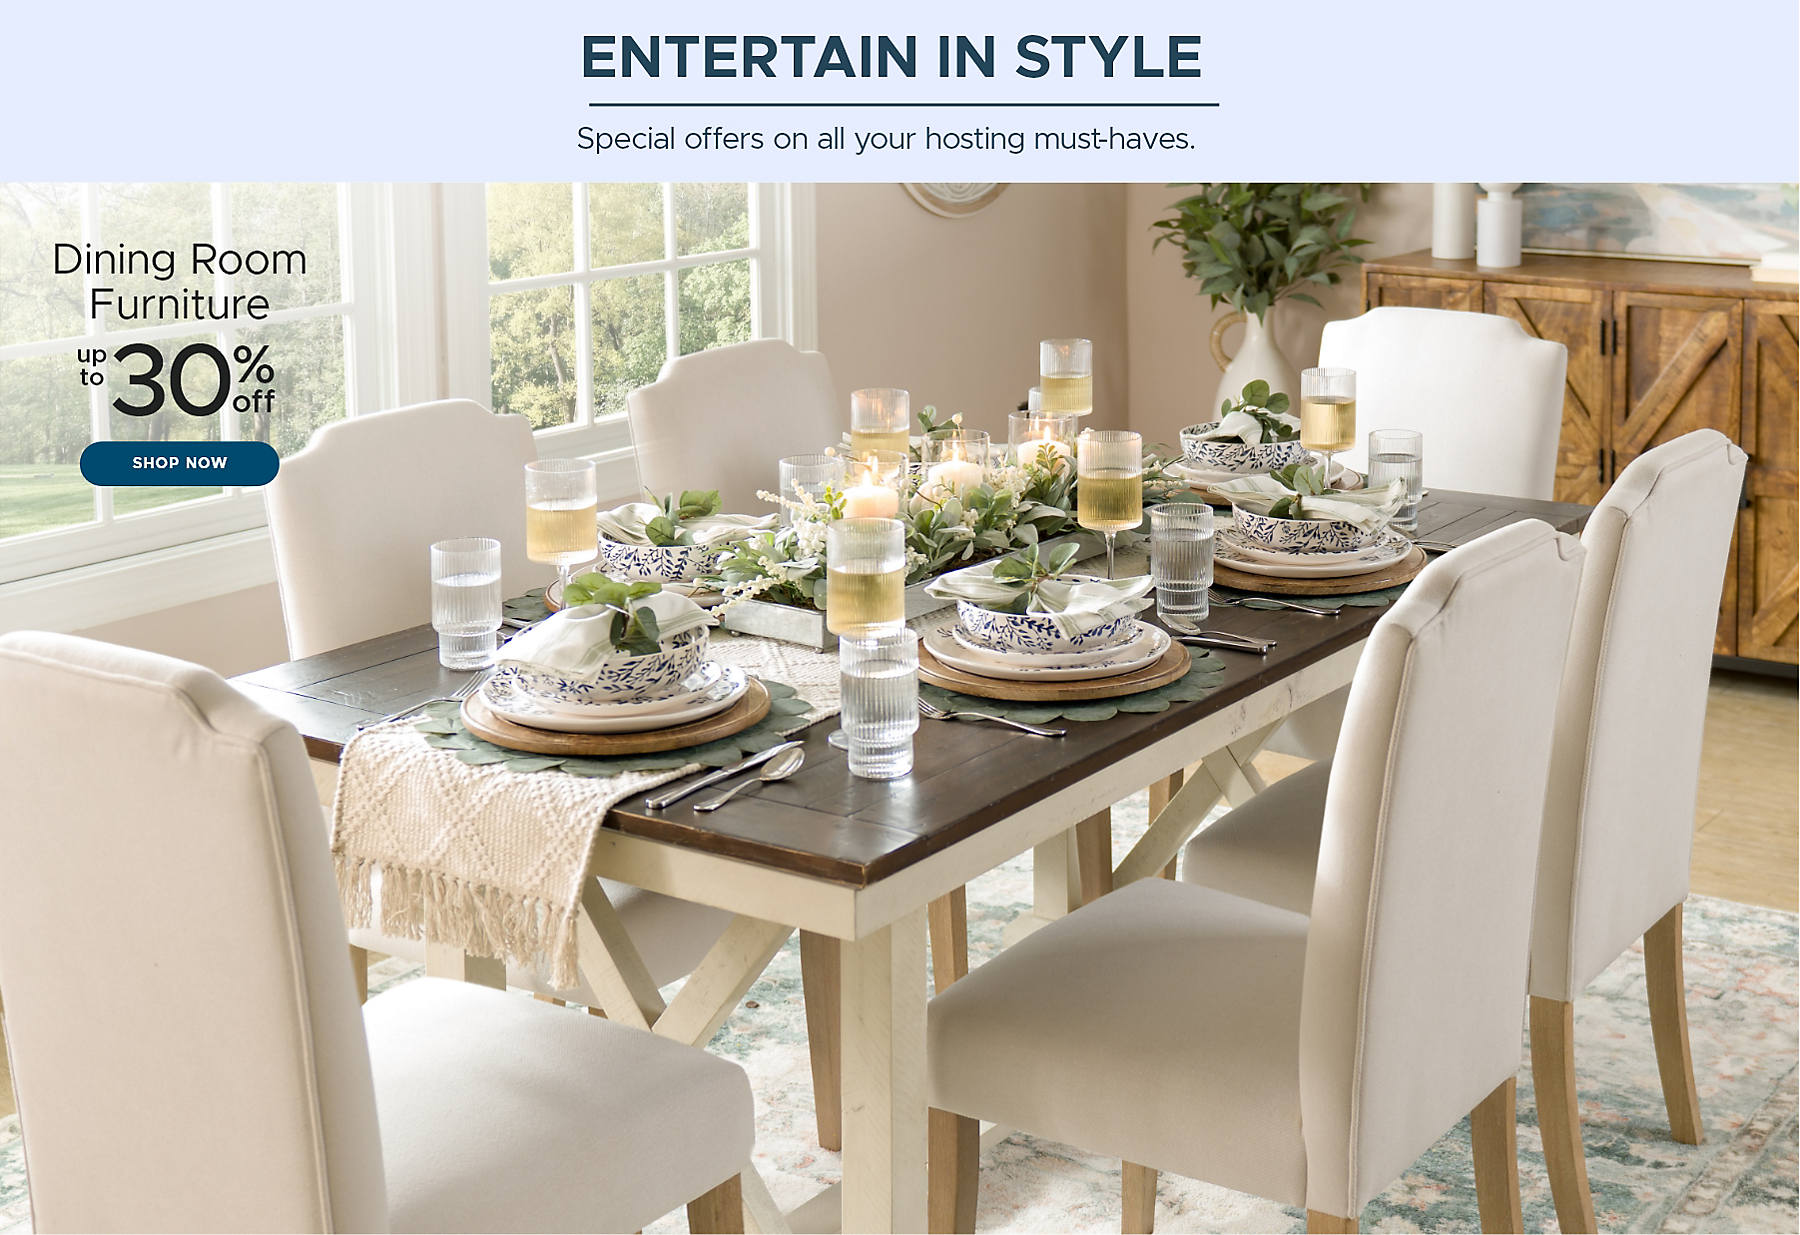 Entertain in Style Special offers on all your hosting must-haves. Dining Room Furniture up to 30% off shop now